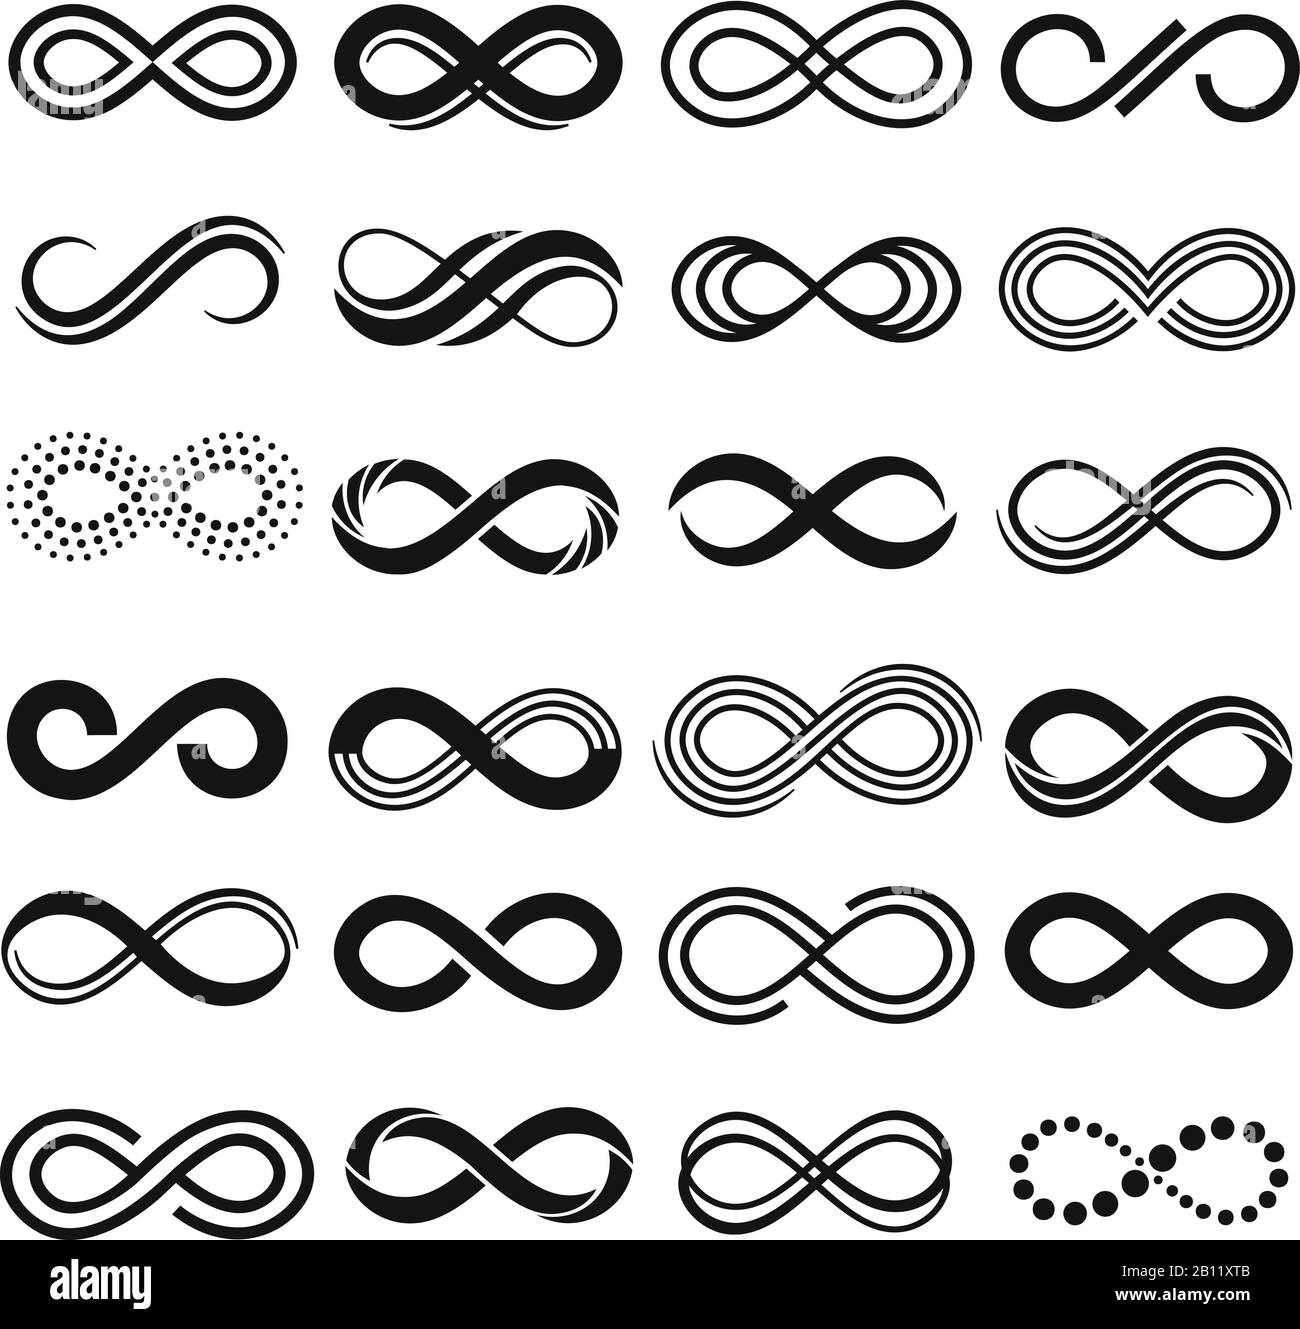 Infinity symbol. Infinit repetition, unlimited contour and endless isolated vector symbols set Stock Vector